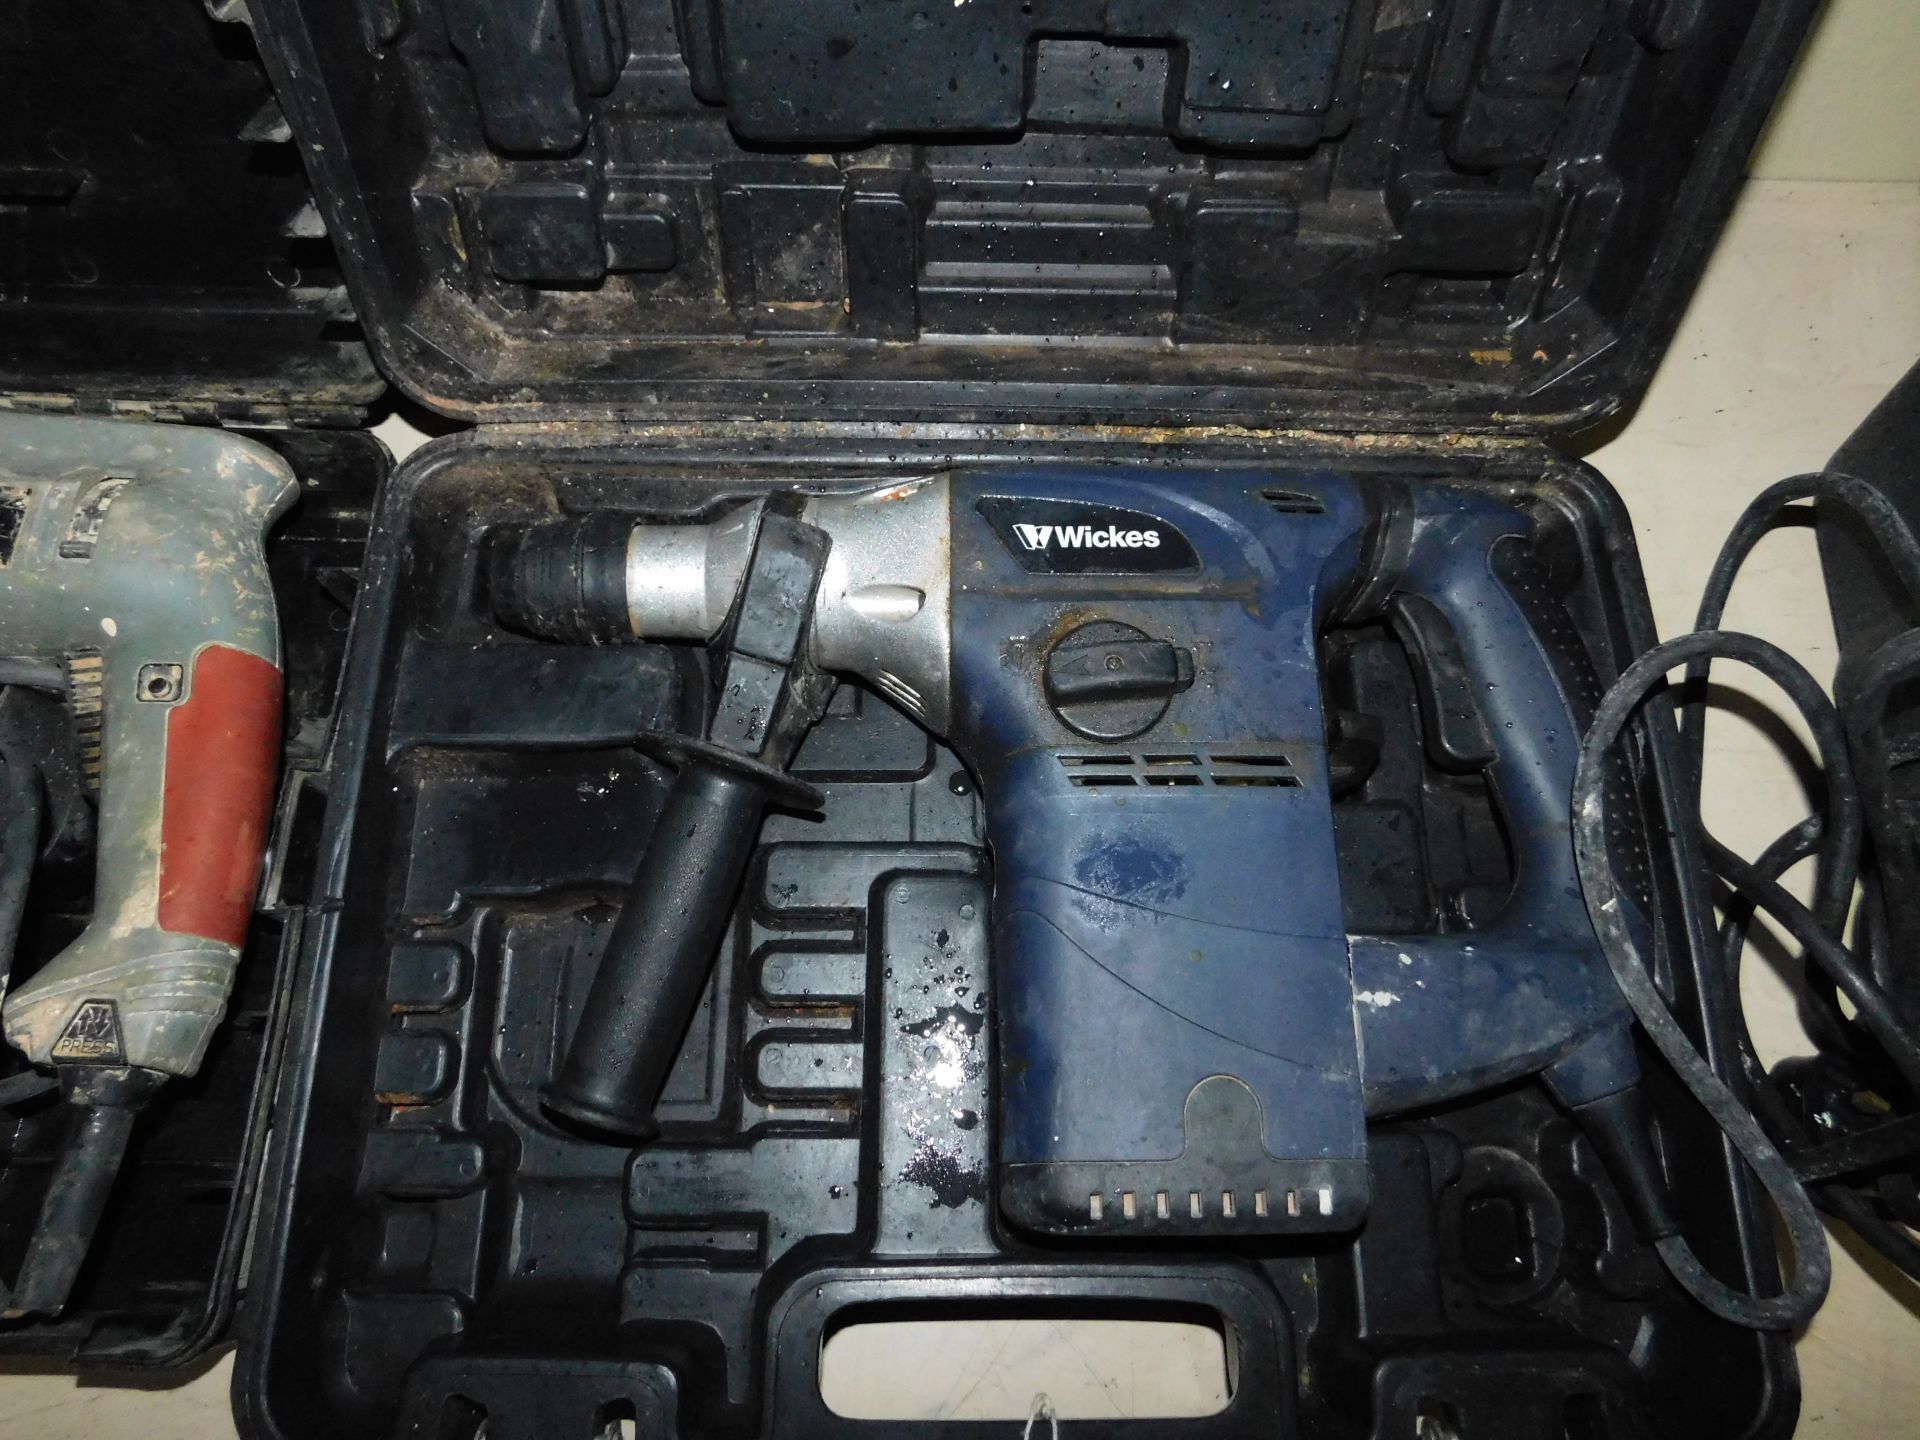 Wickes SDS Plus 1020W Hammer Drill & Wickes WMHD620 Drill, Both 240v (Location Brentwood. Please - Image 3 of 3